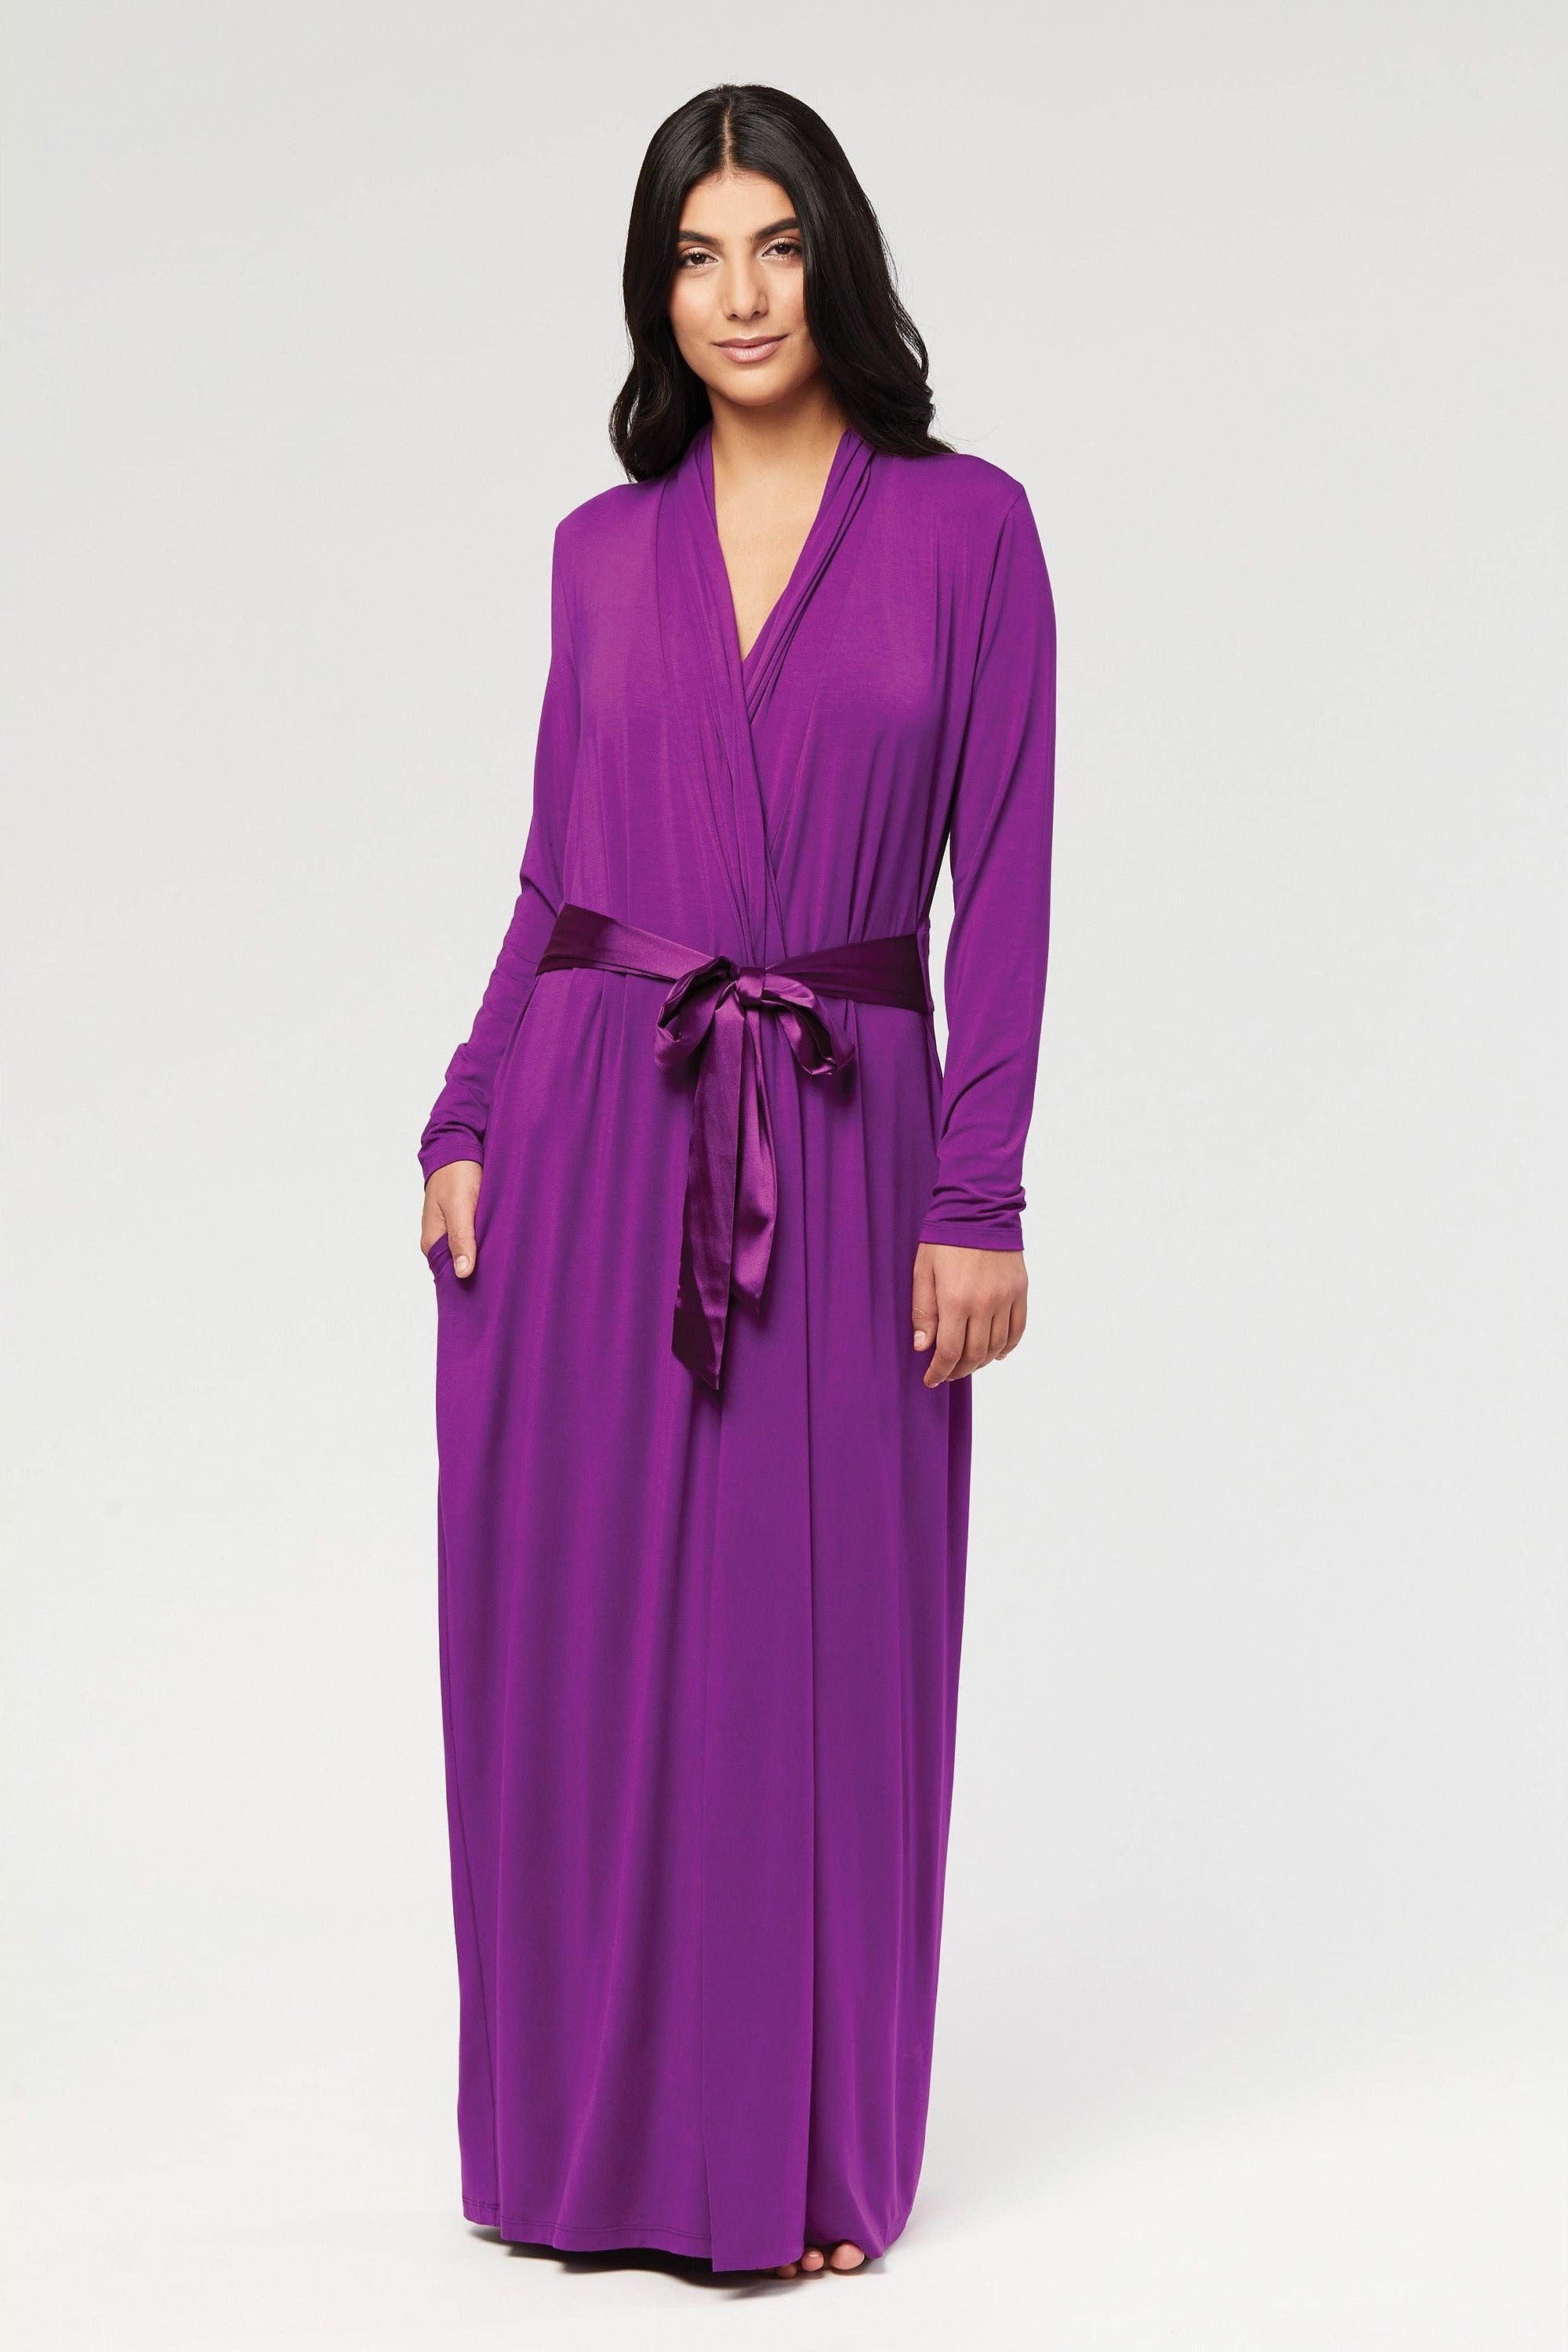 Fleur't Iconic Long Robe - Style 621, closed